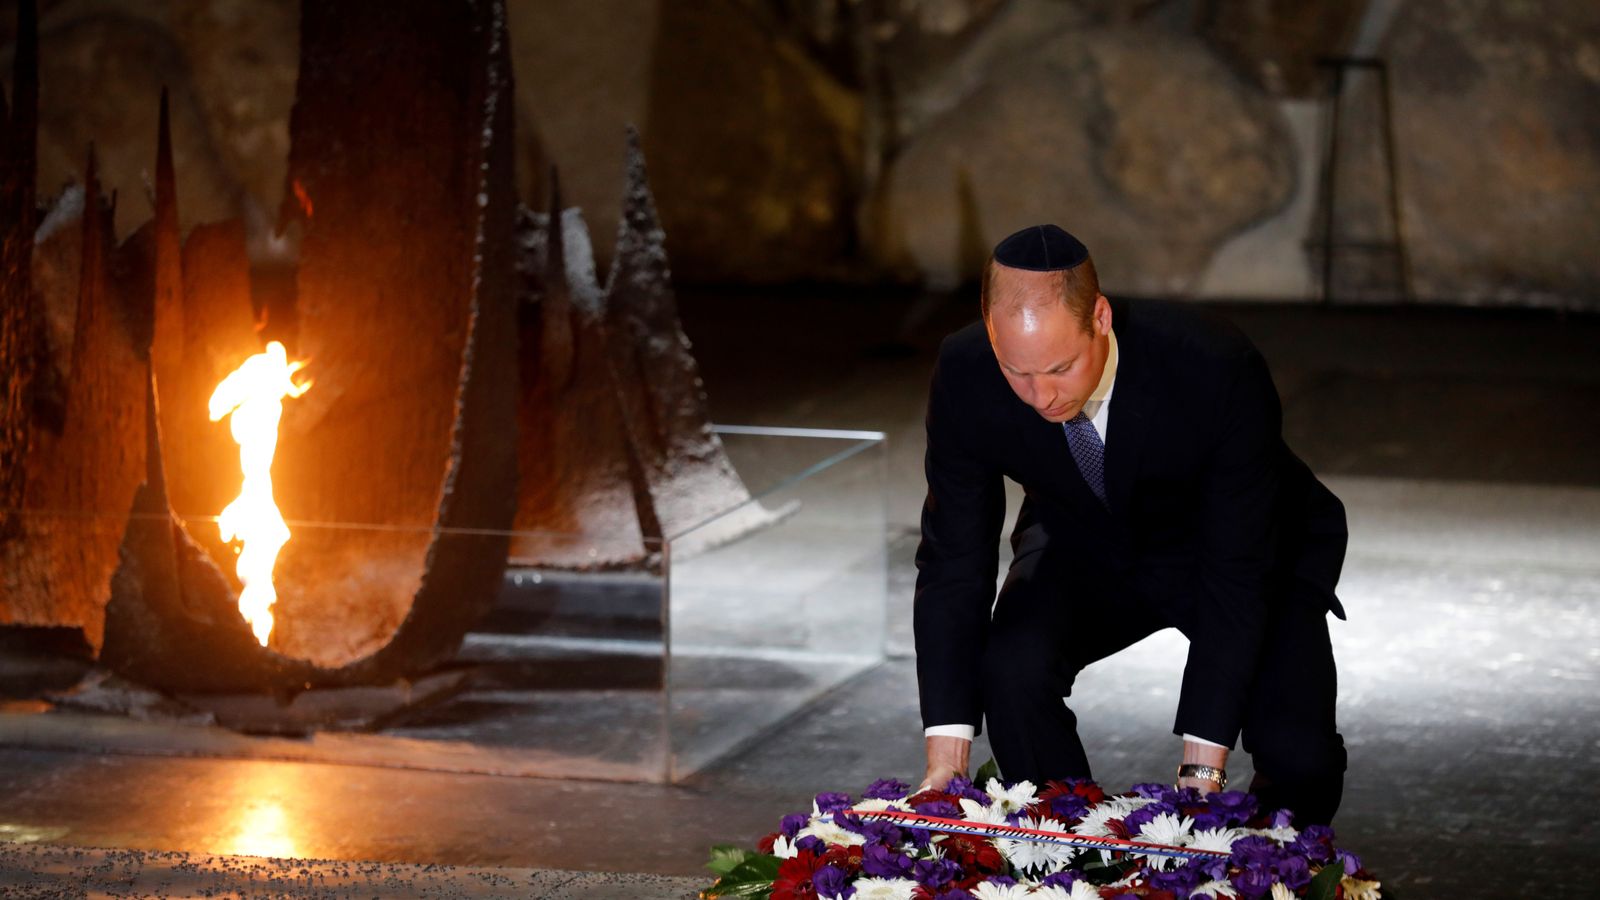 Israel president asks Prince William to take 'message of peace' to